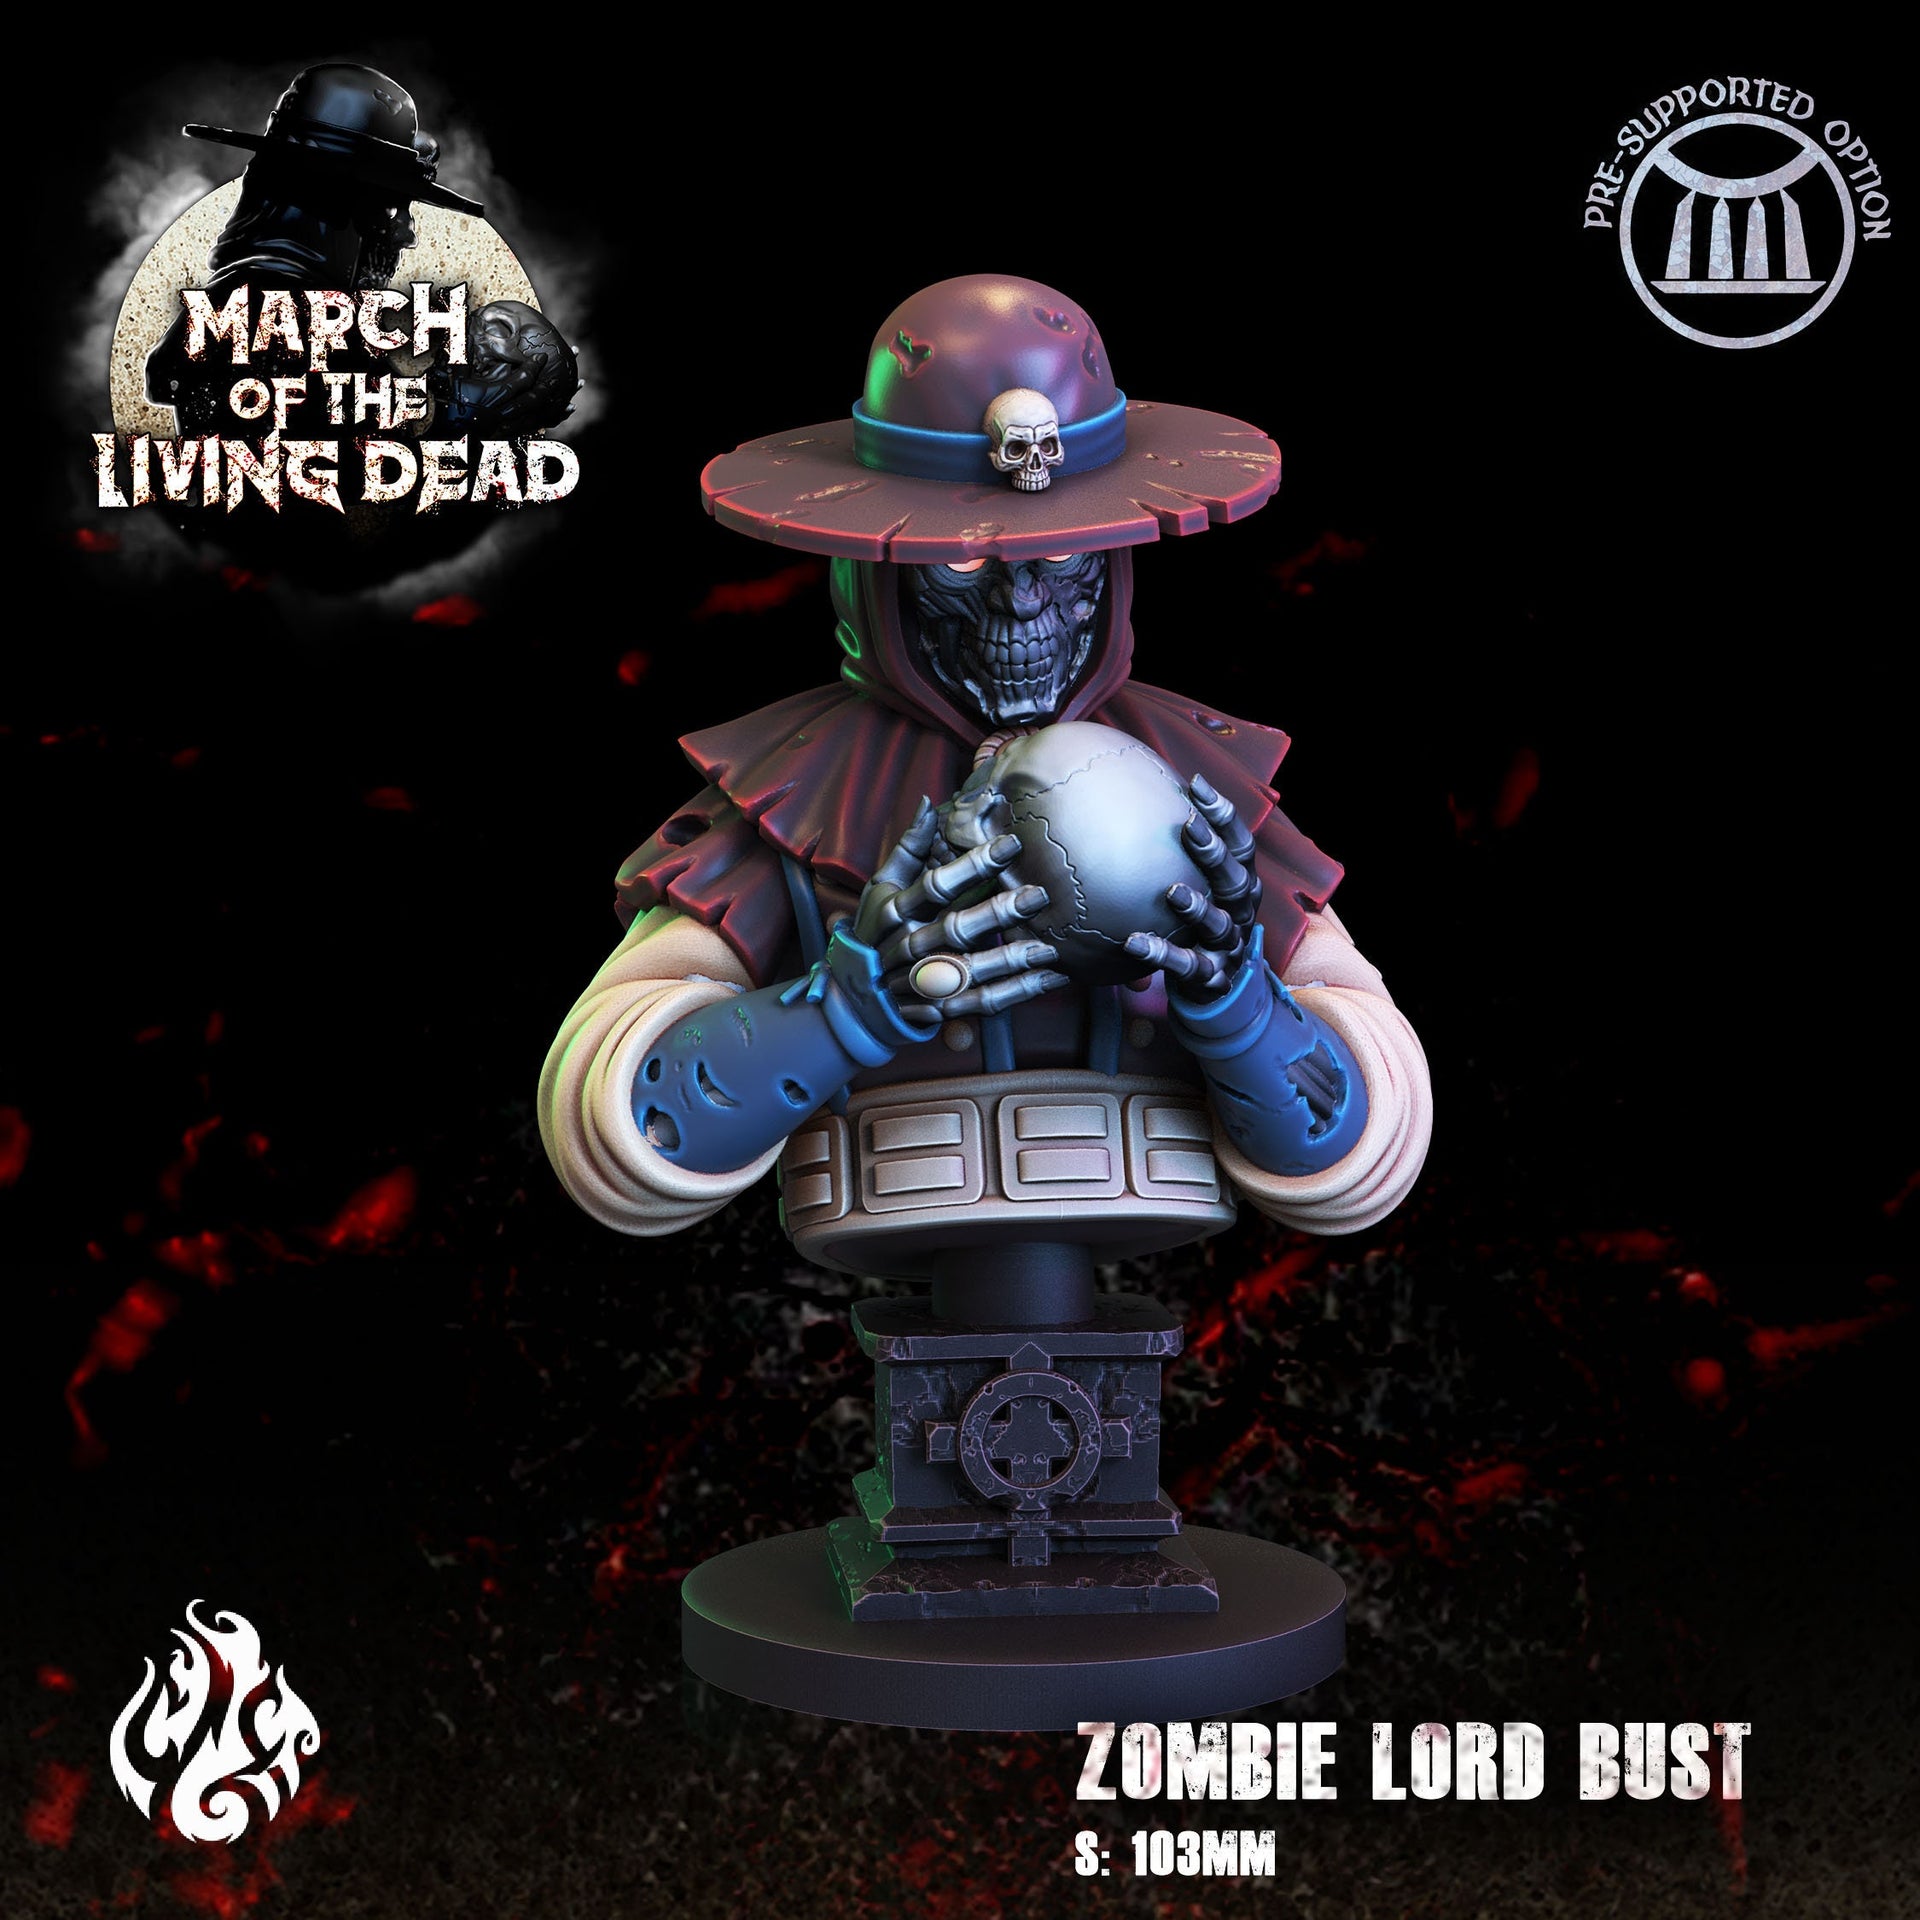 Zombie Lord Bust - Crippled God Foundry - March of the Living Dead 